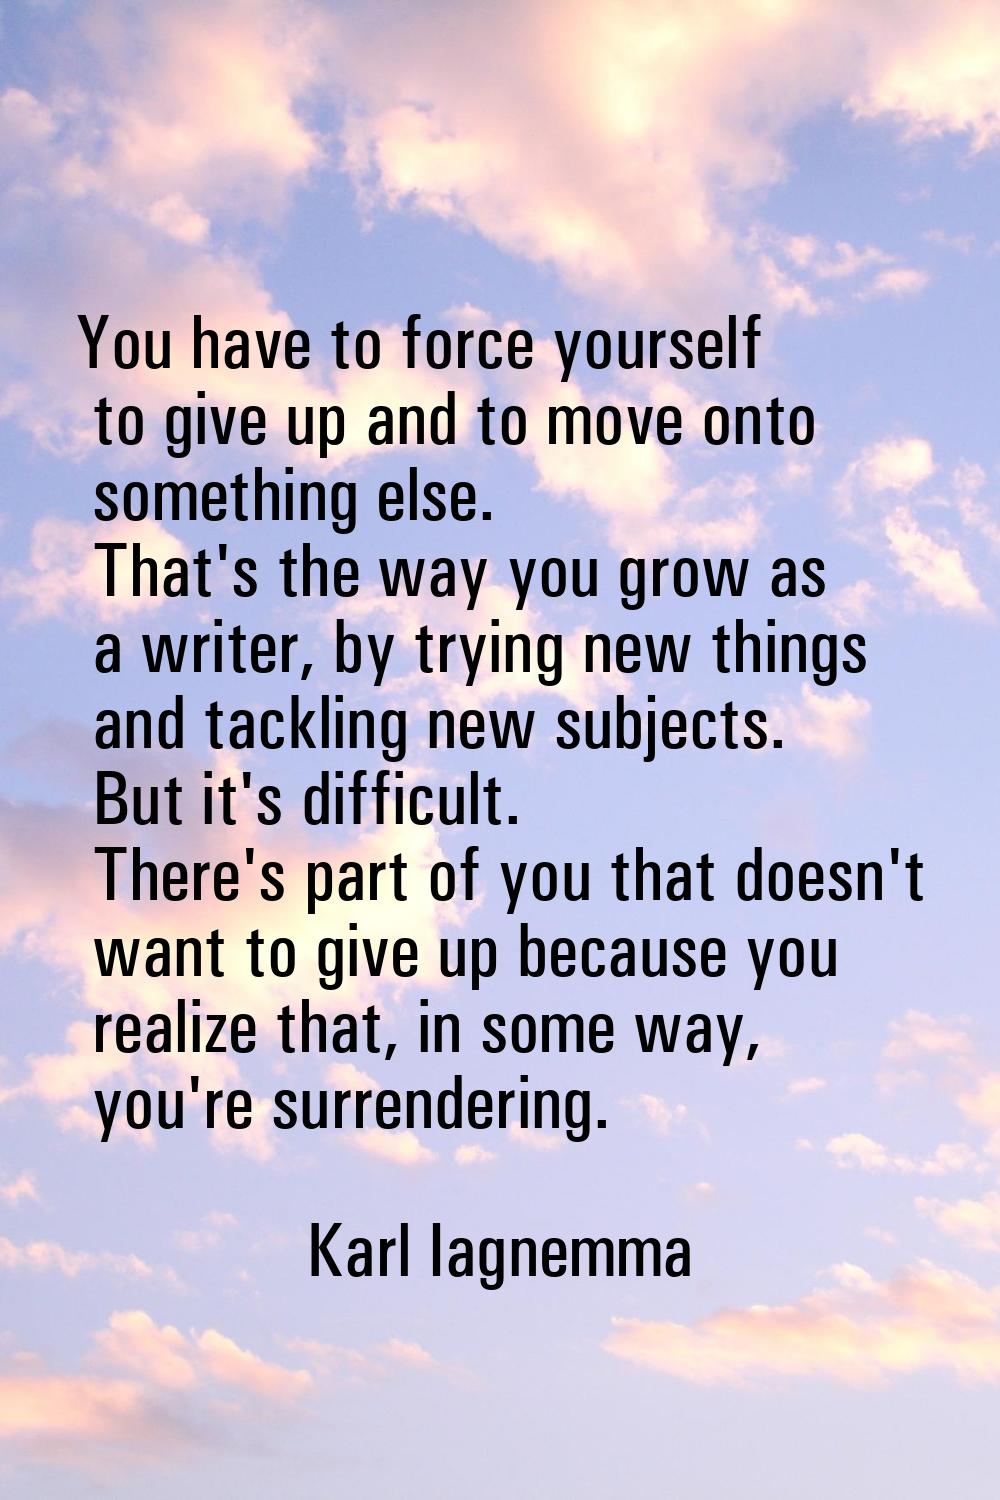 You have to force yourself to give up and to move onto something else. That's the way you grow as a